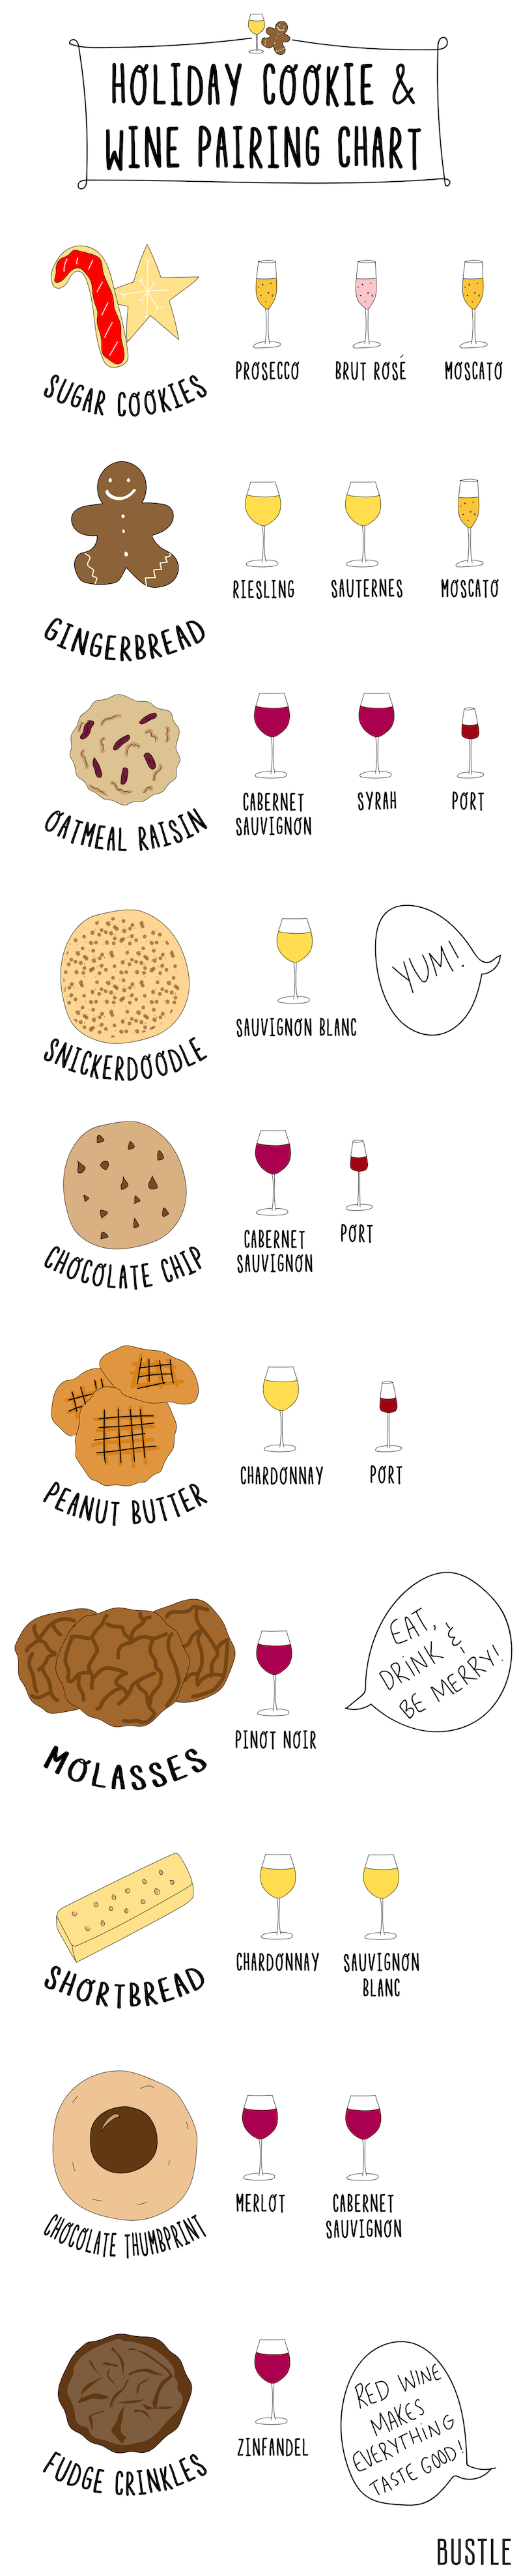 Ultimate Wine & Holiday Cookie Pairs